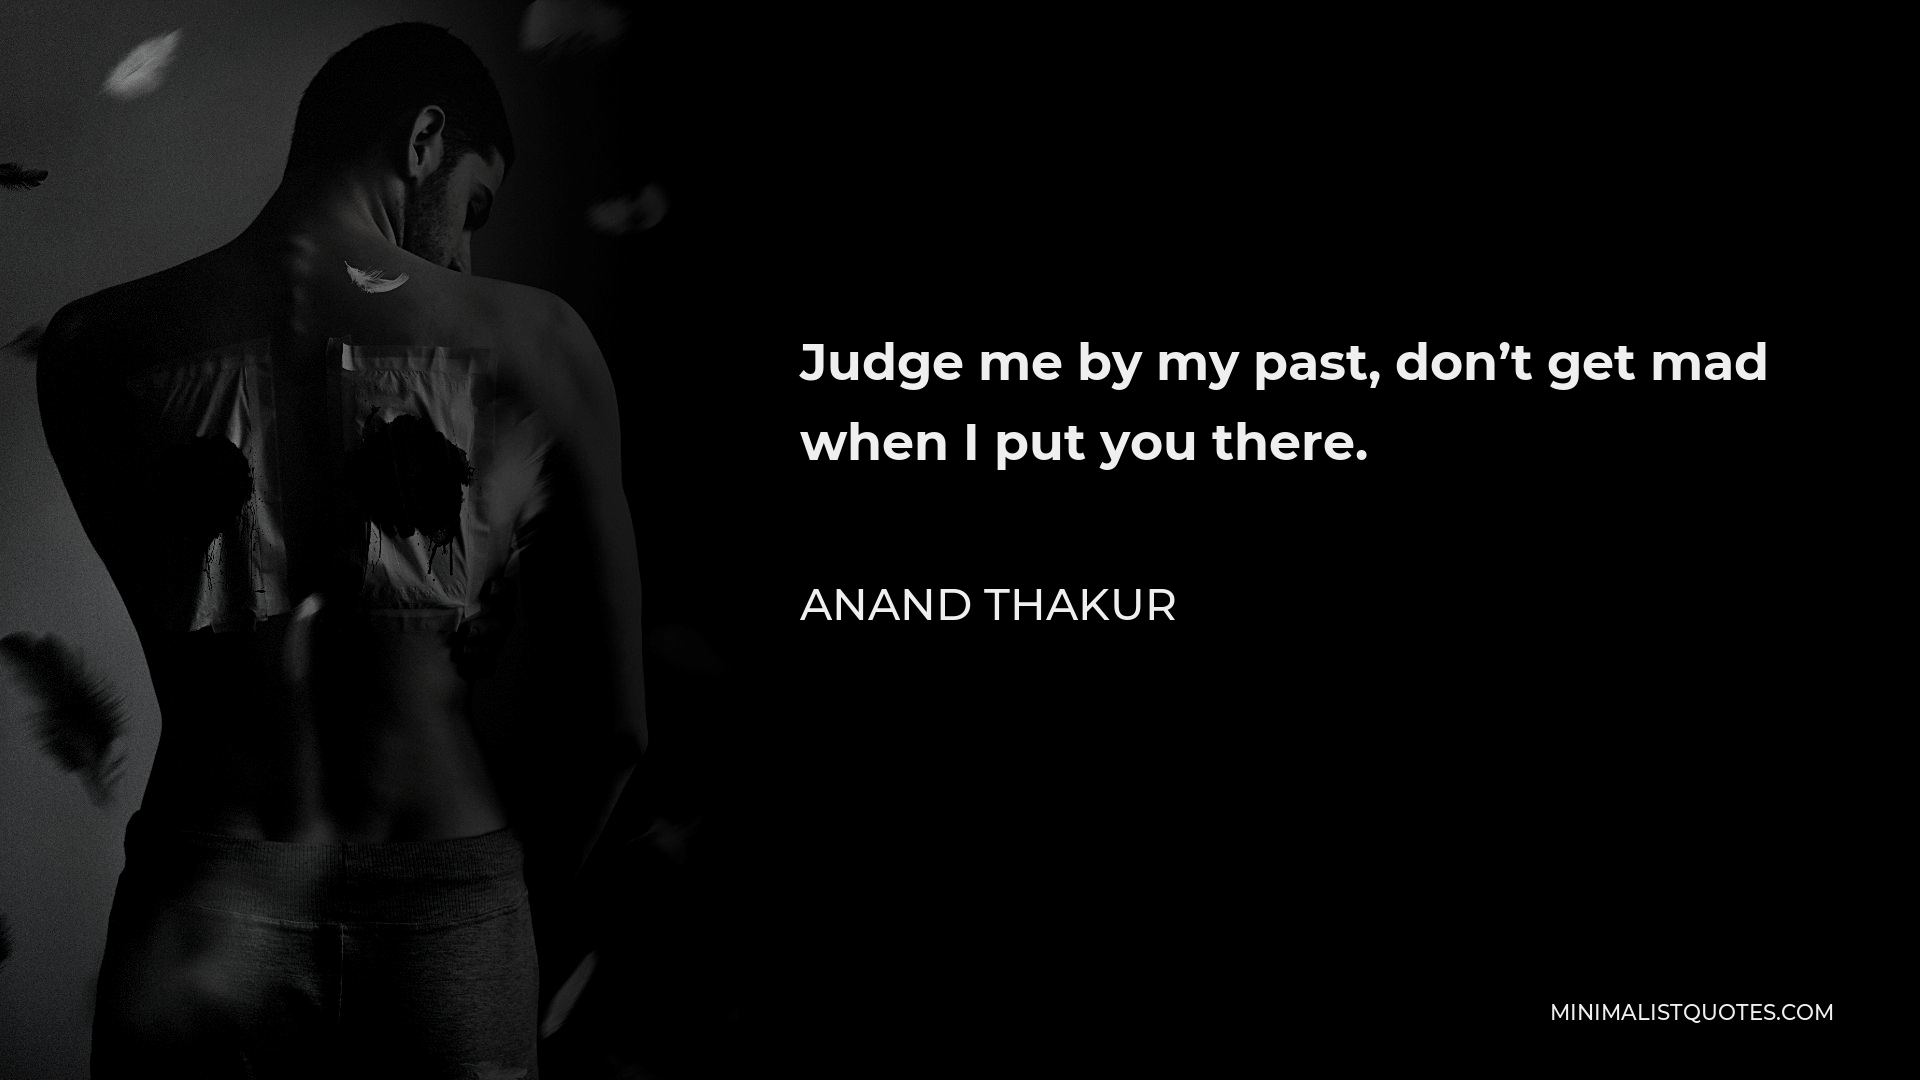 Anand Thakur Quote - Judge me by my past, don’t get mad when I put you there.